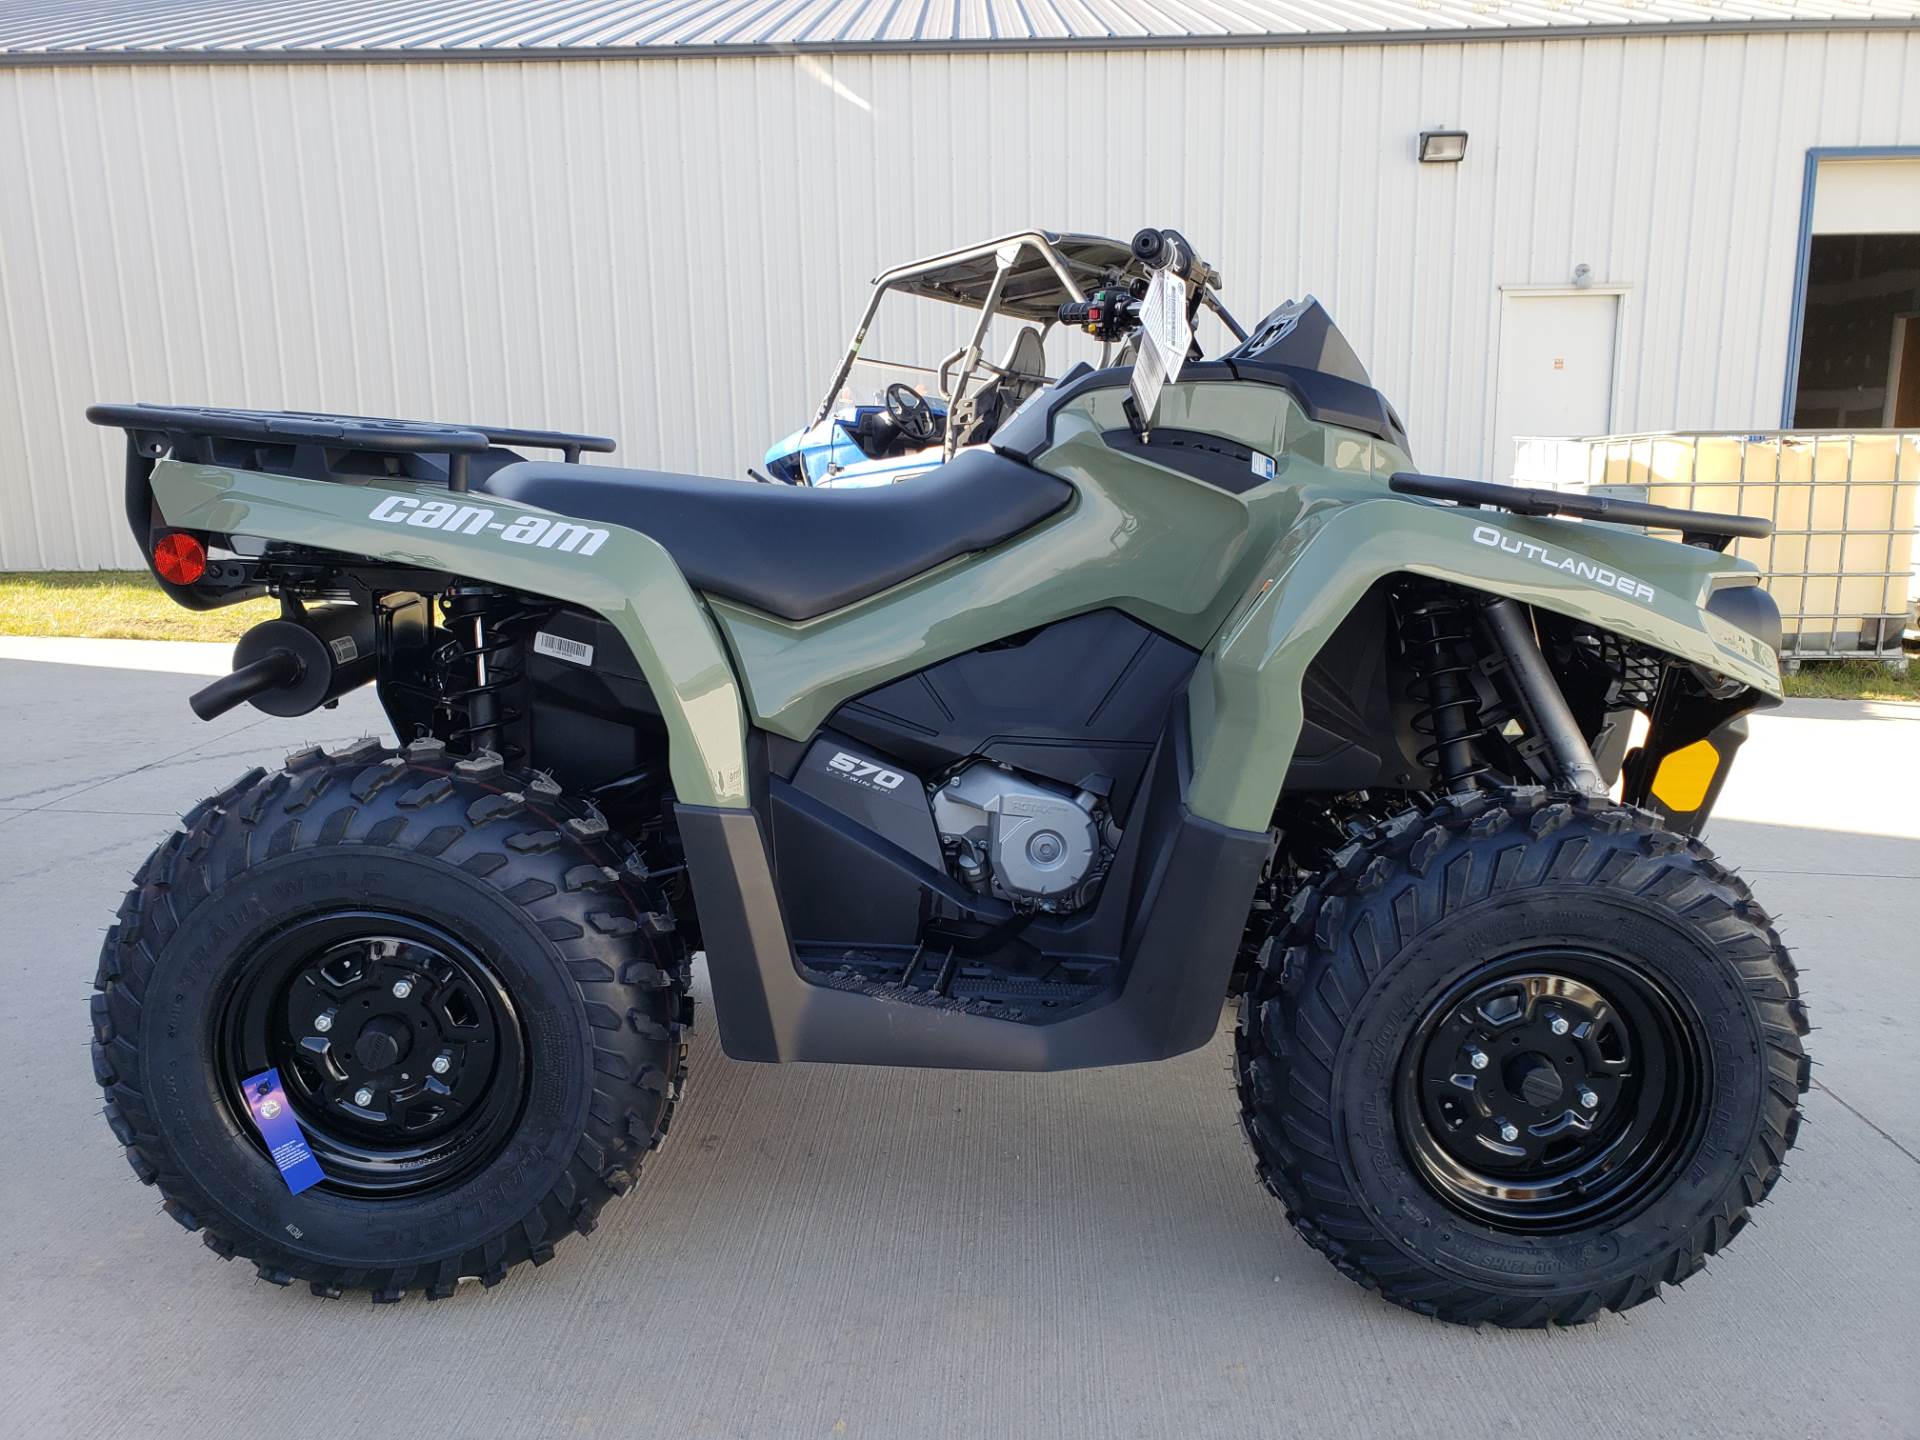 Used 2020 Can-Am Outlander 570 ATVs in Cambridge, OH ...